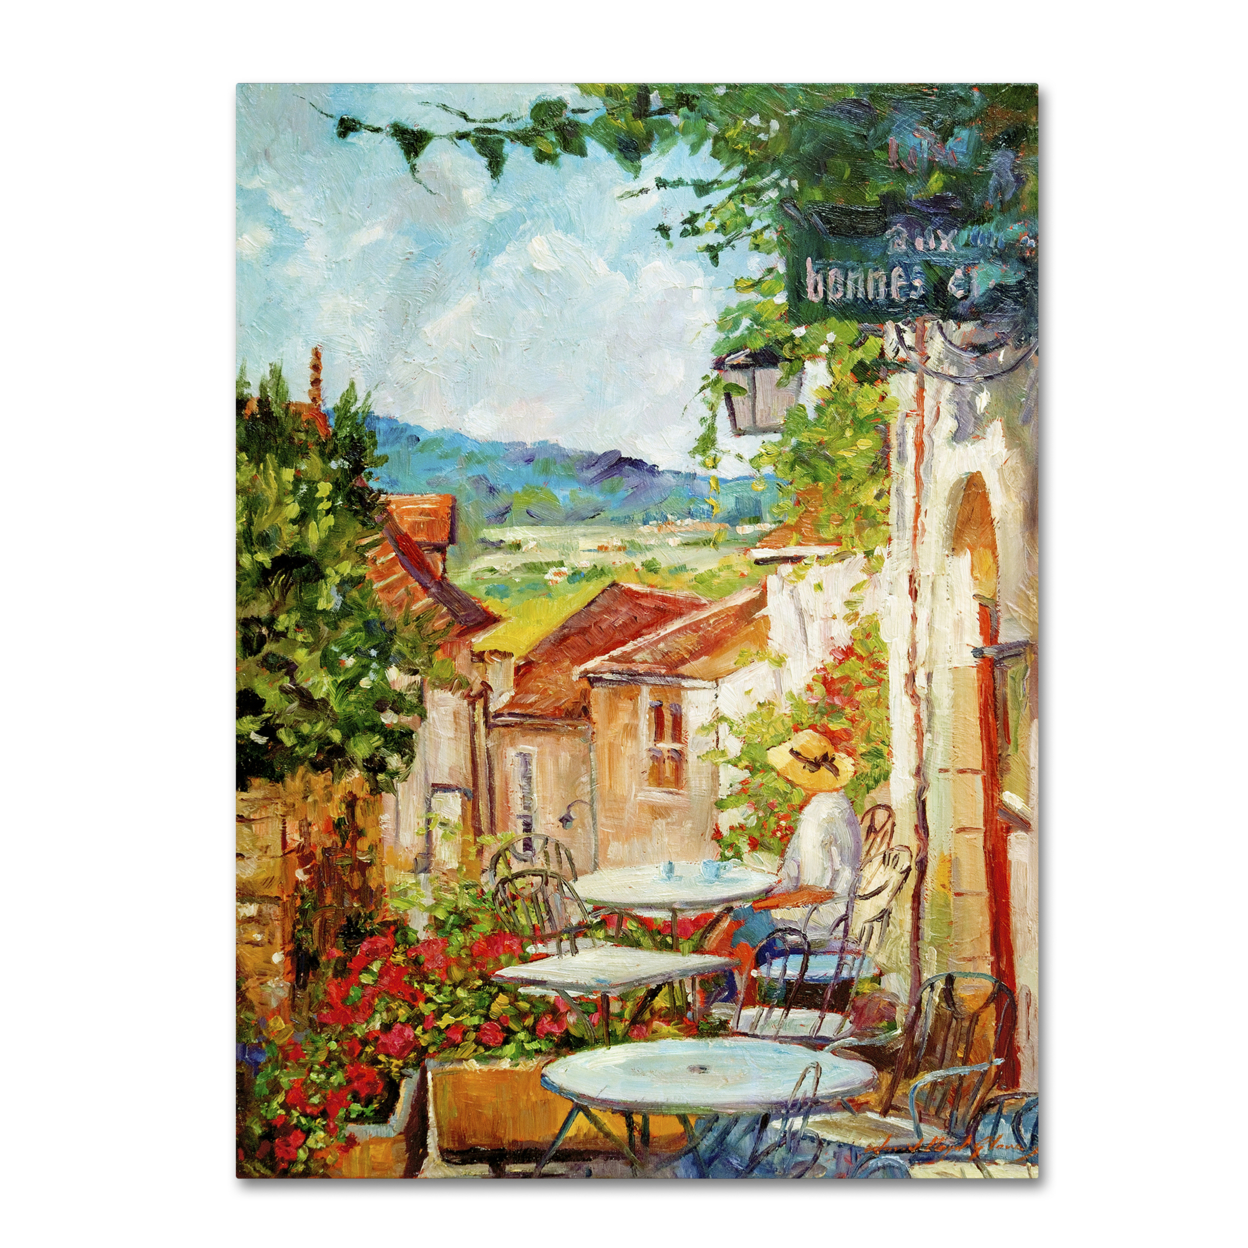 David Lloyd Glover 'Provence Cafe Morning' Canvas Wall Art 35 X 47 Inches